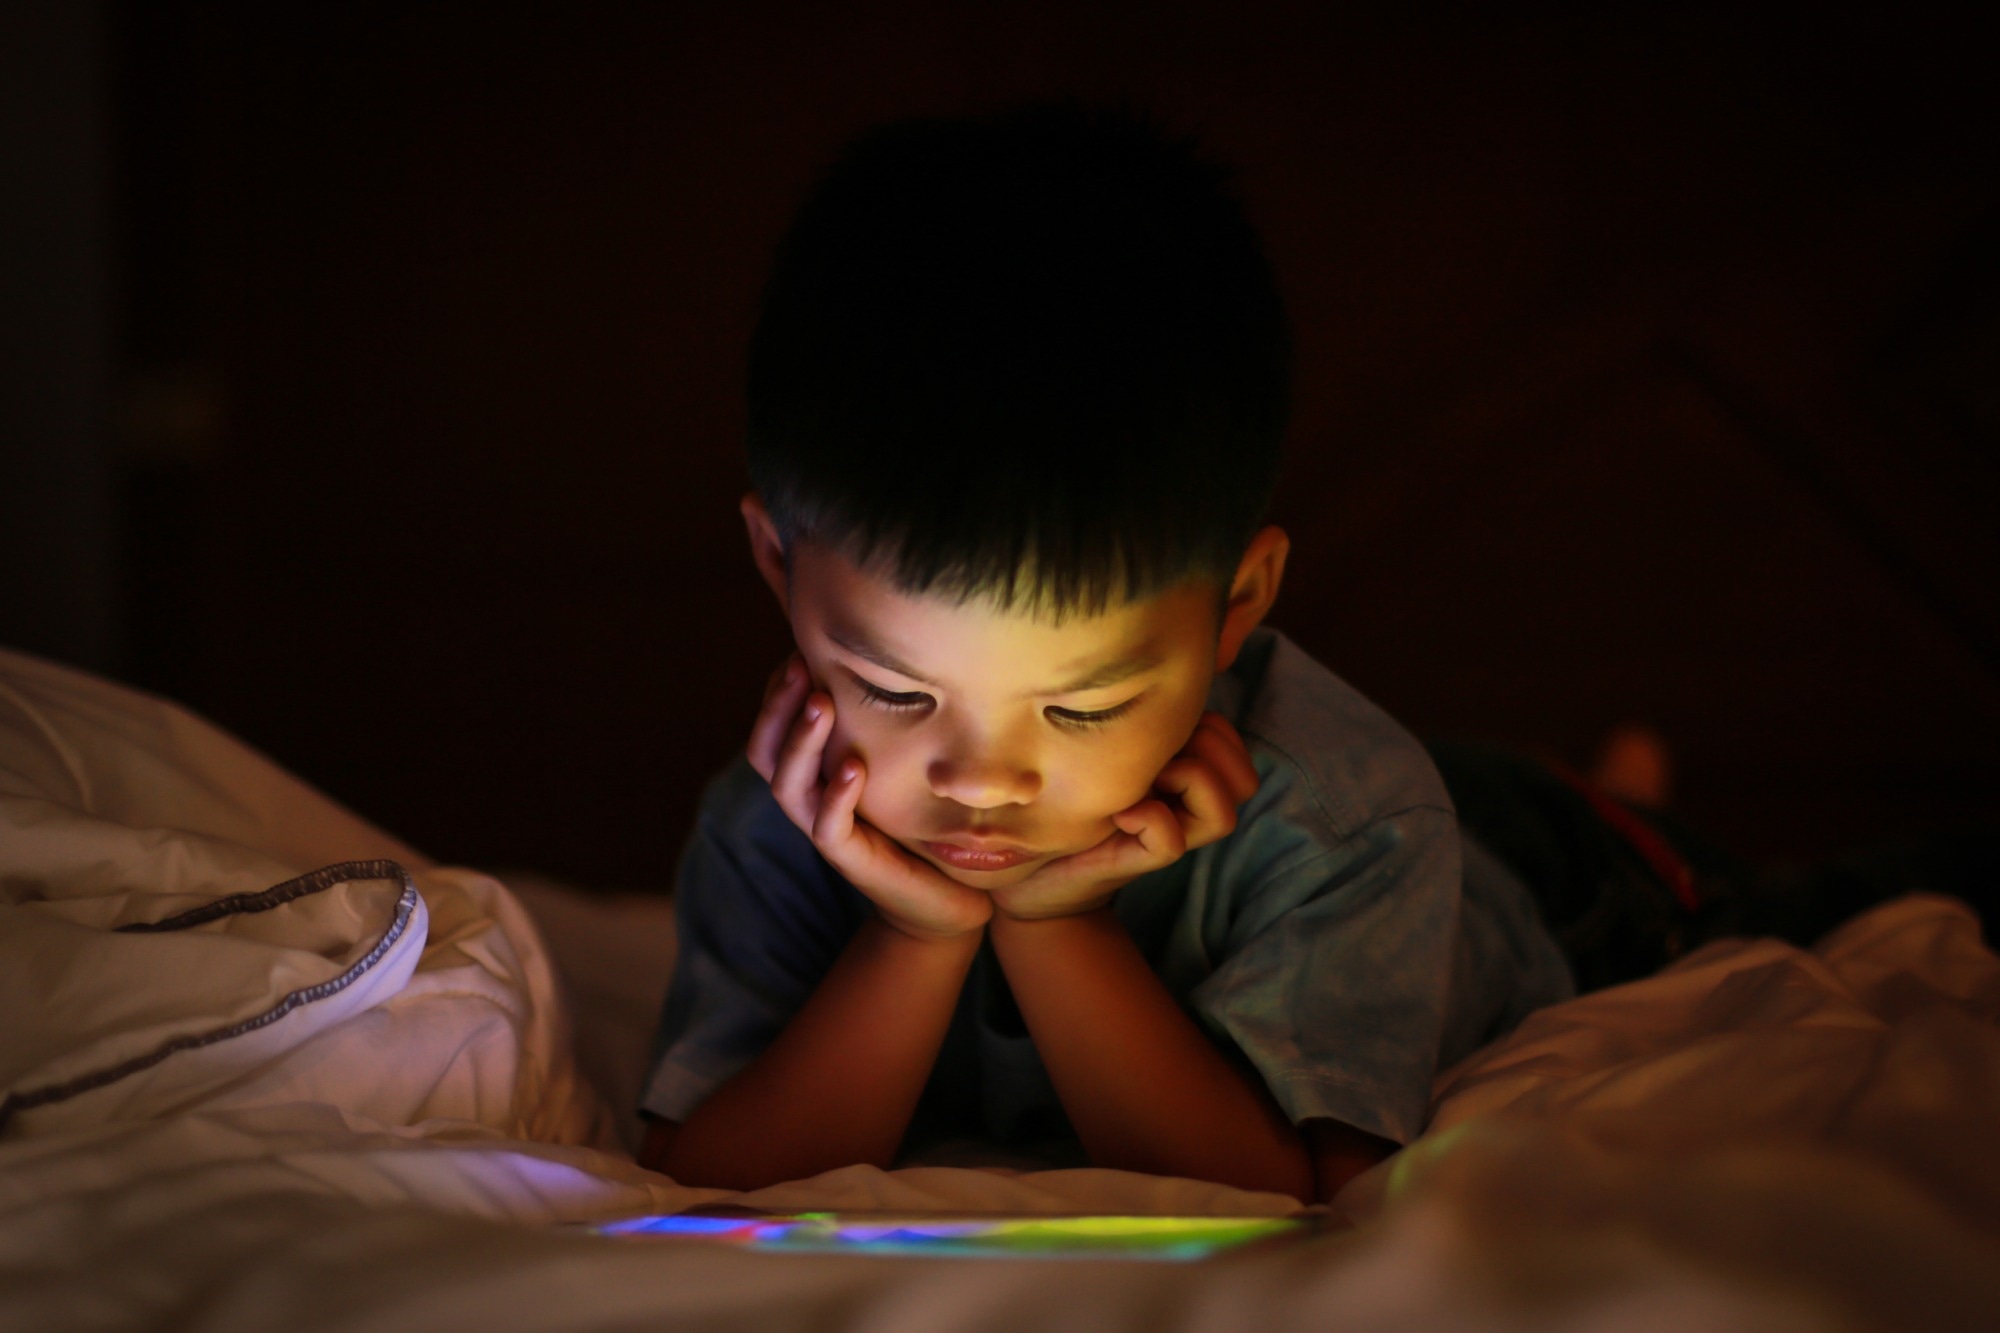 Study: Trends in Screen Time Use Among Children During the COVID-19 Pandemic, July 2019 Through August 2021. Image Credit: vinnstock / Shutterstock